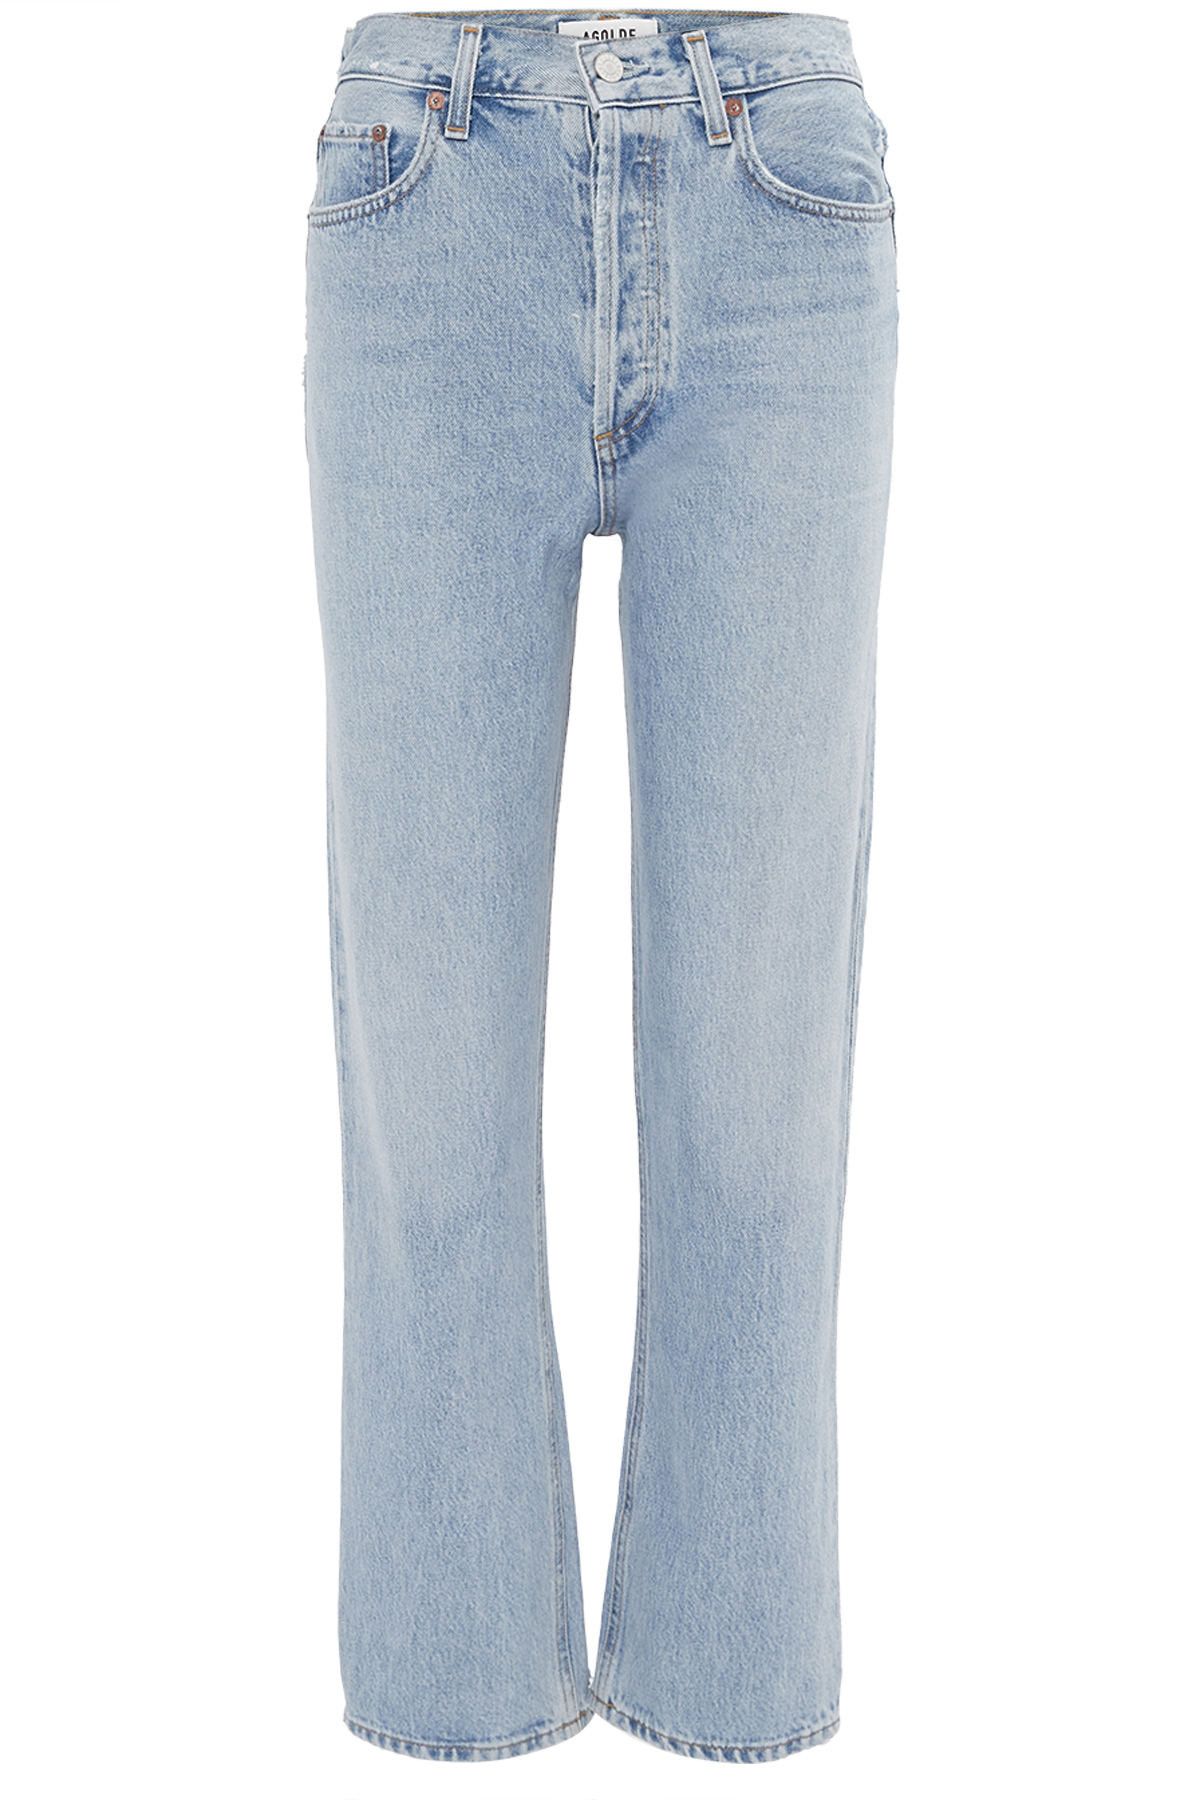 AGOLDE 90'S Pinch Waist High Rise Straight Jeans